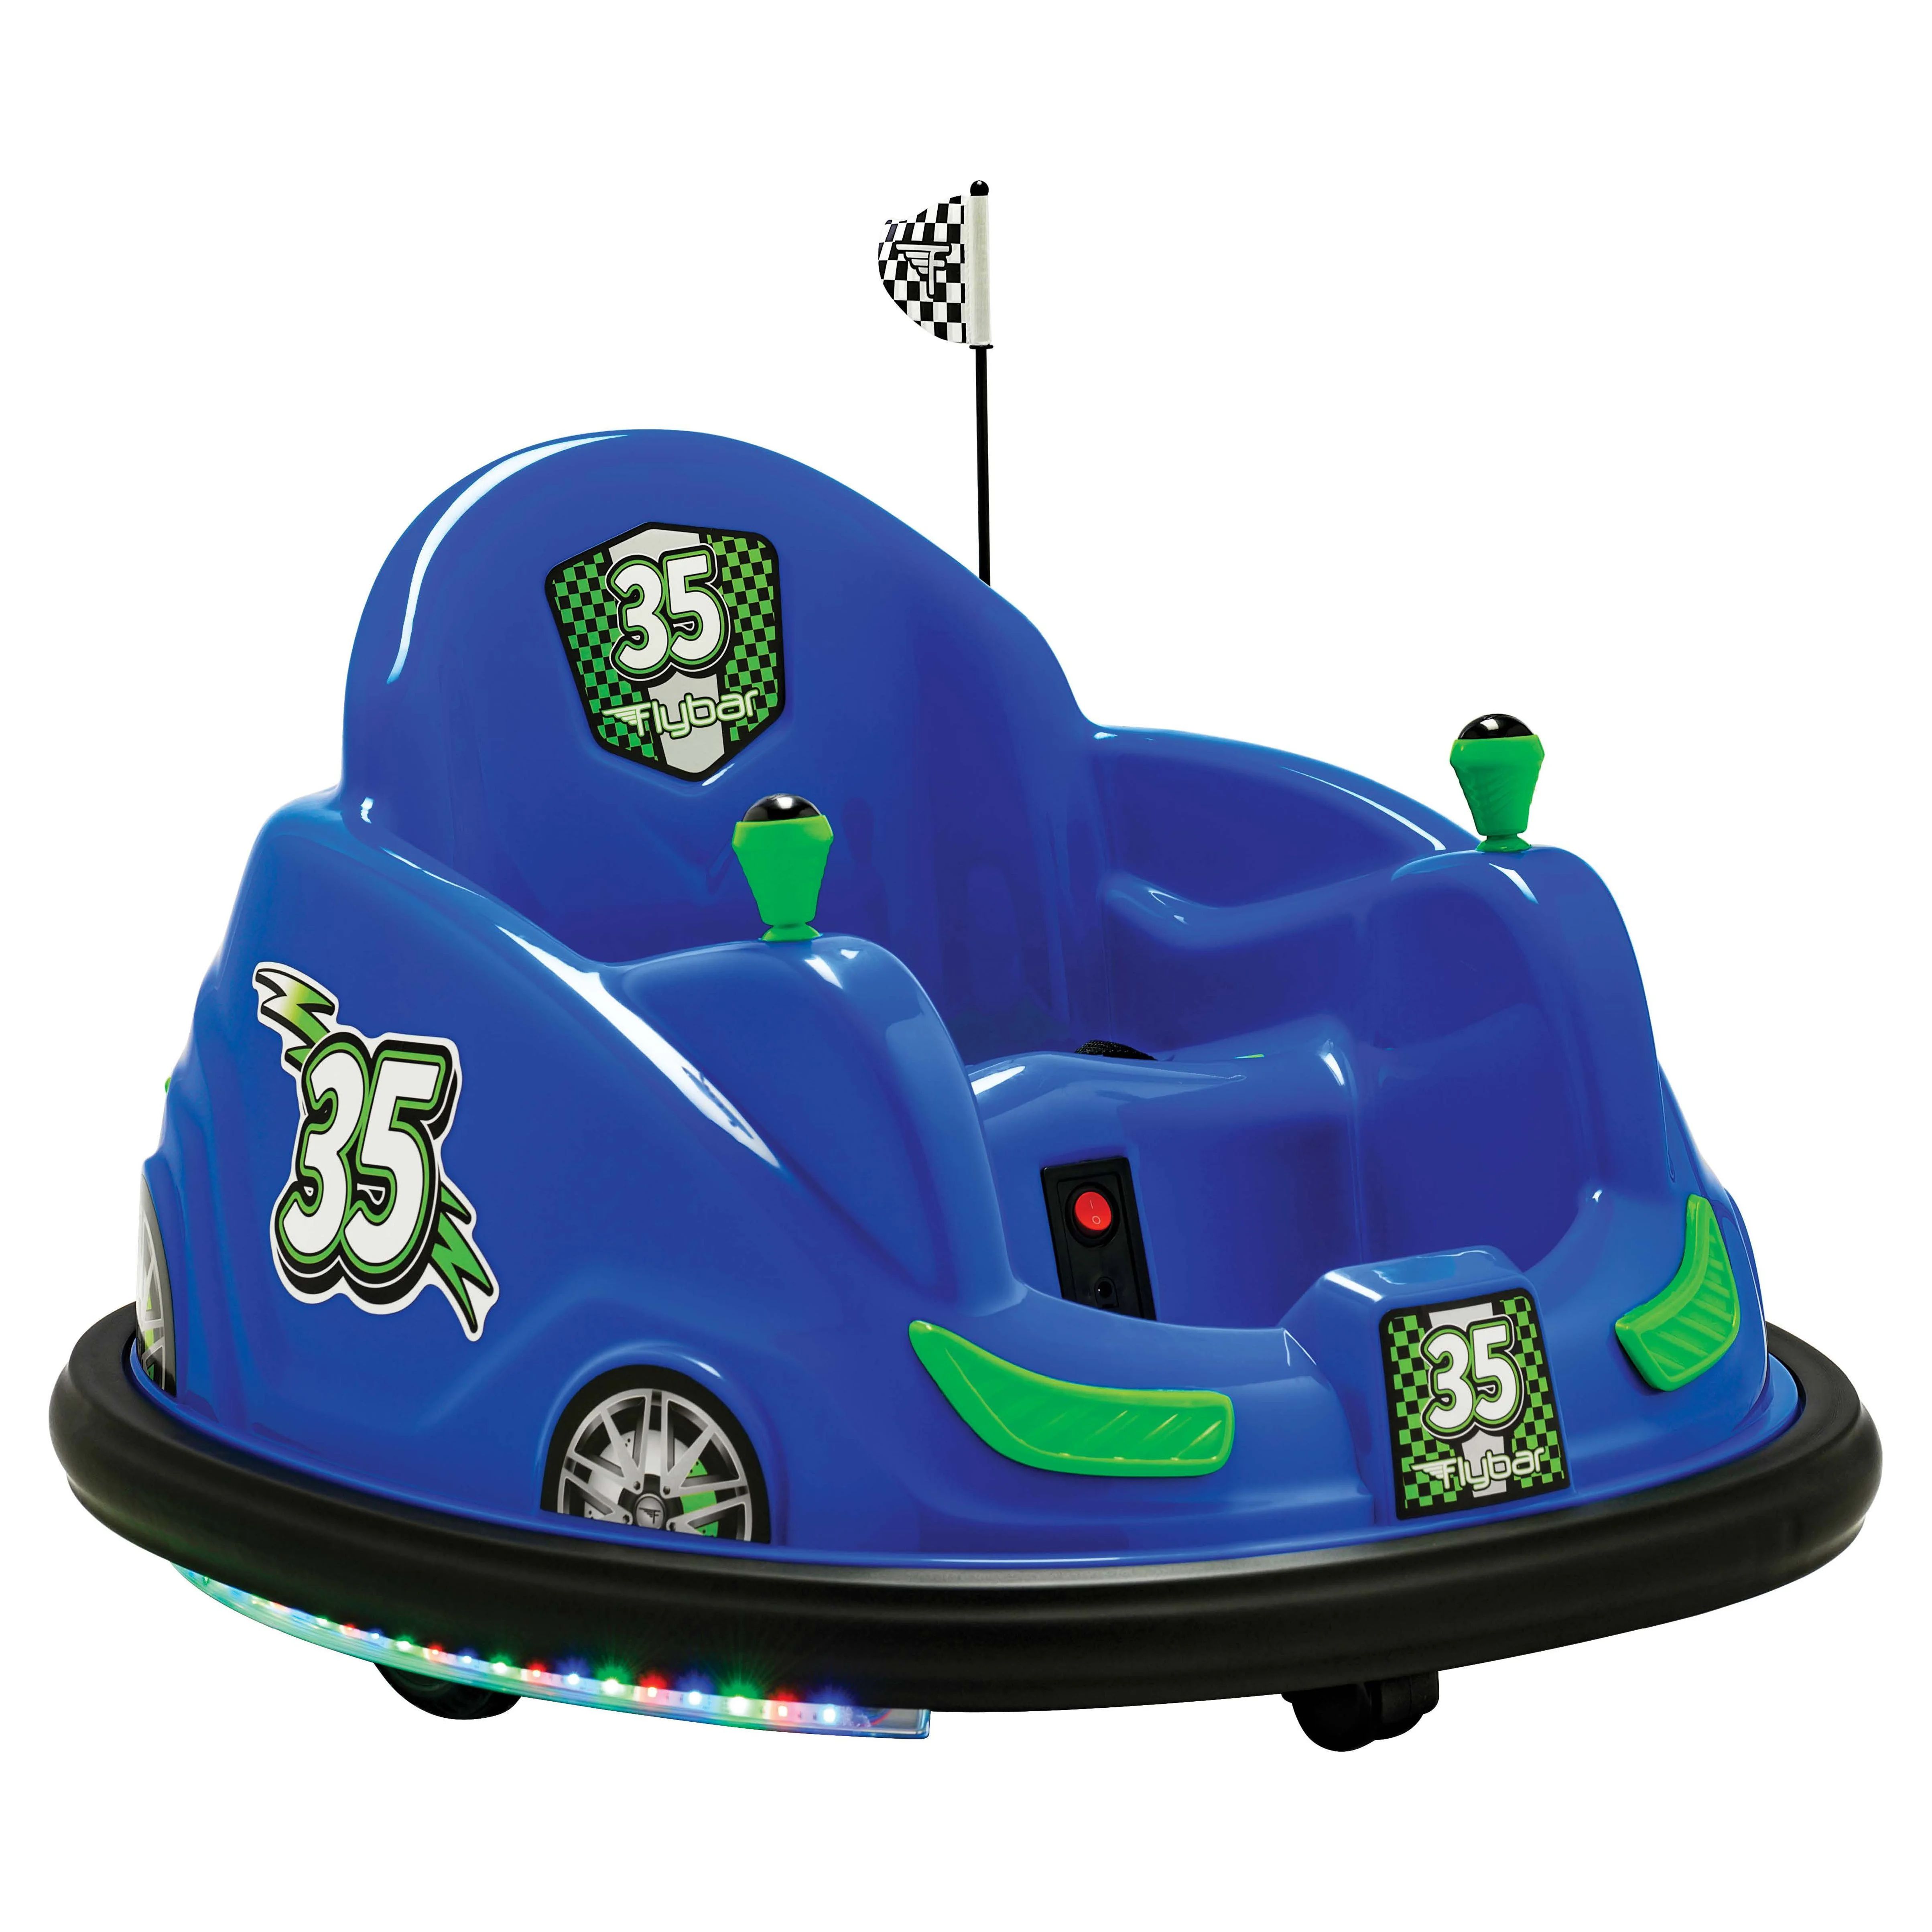 Flybar 6V Bumper Car, Battery Powered Ride On, Fun LED Lights, Includes Charger, Blue | Walmart (US)